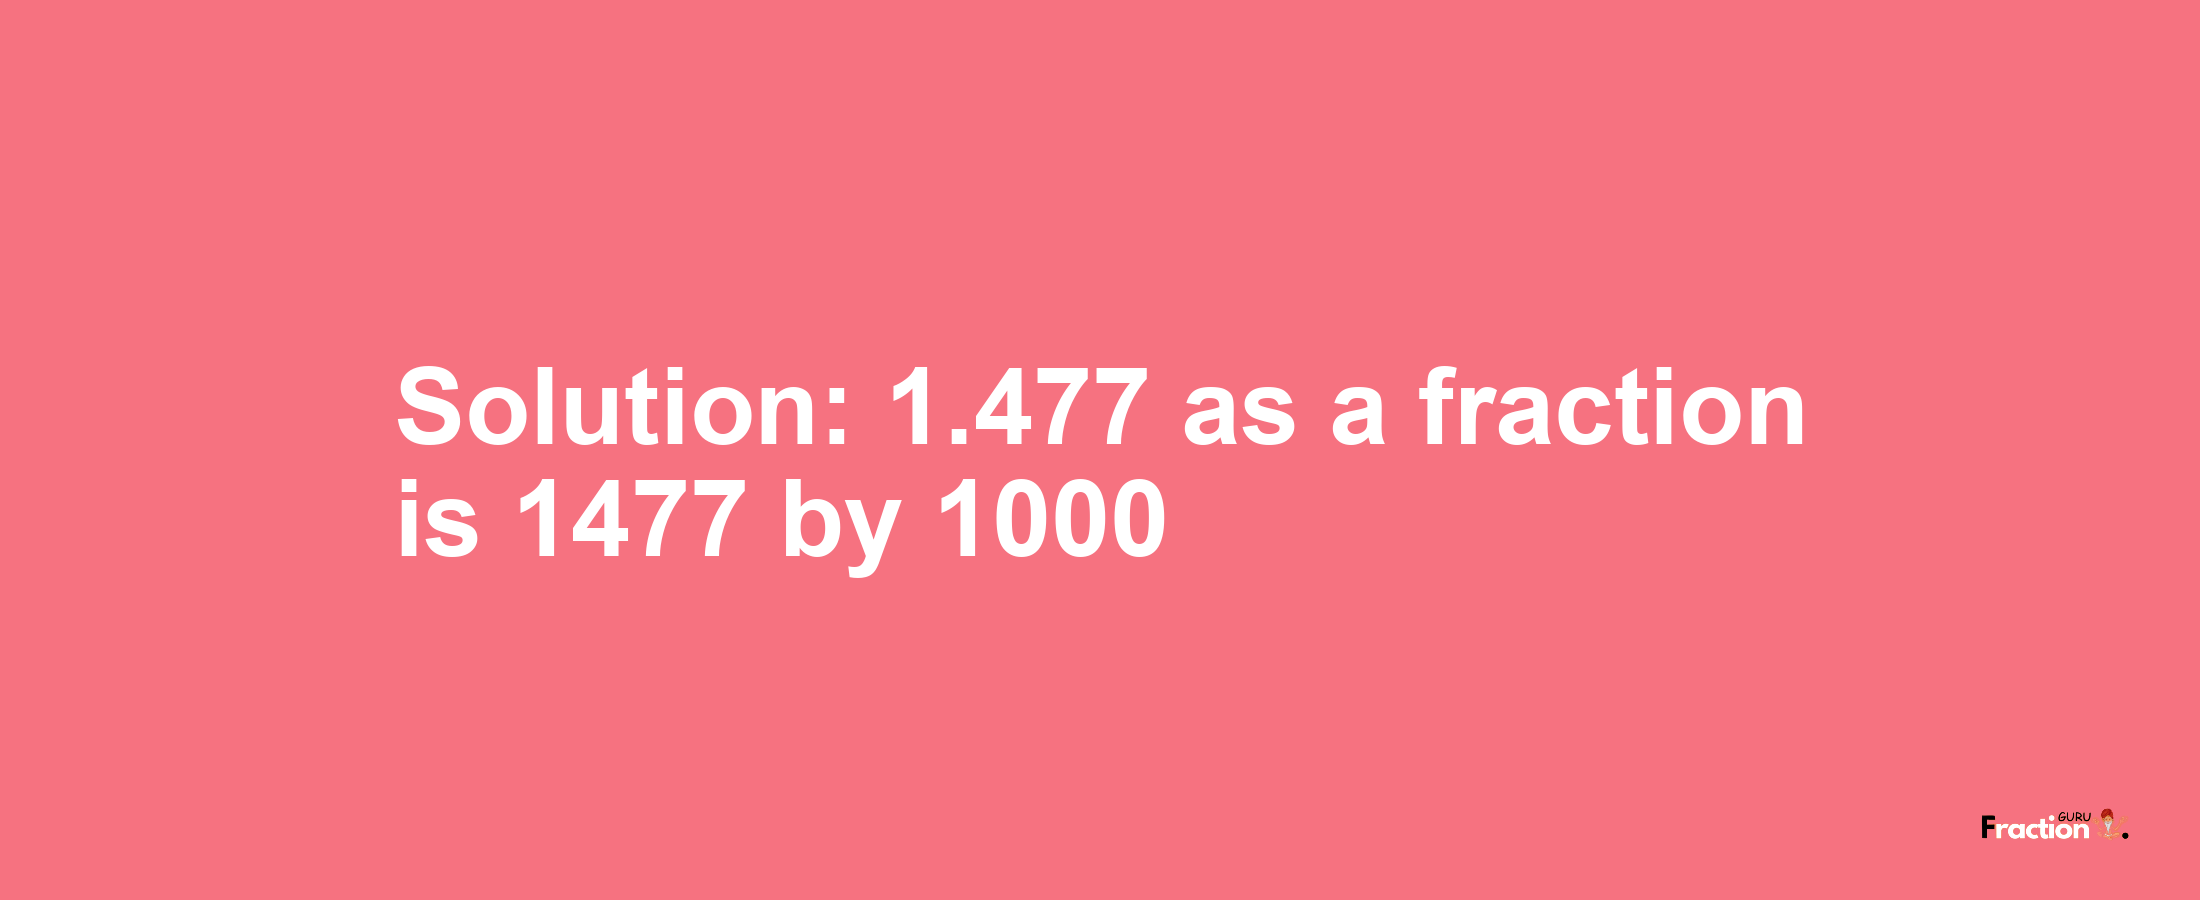 Solution:1.477 as a fraction is 1477/1000